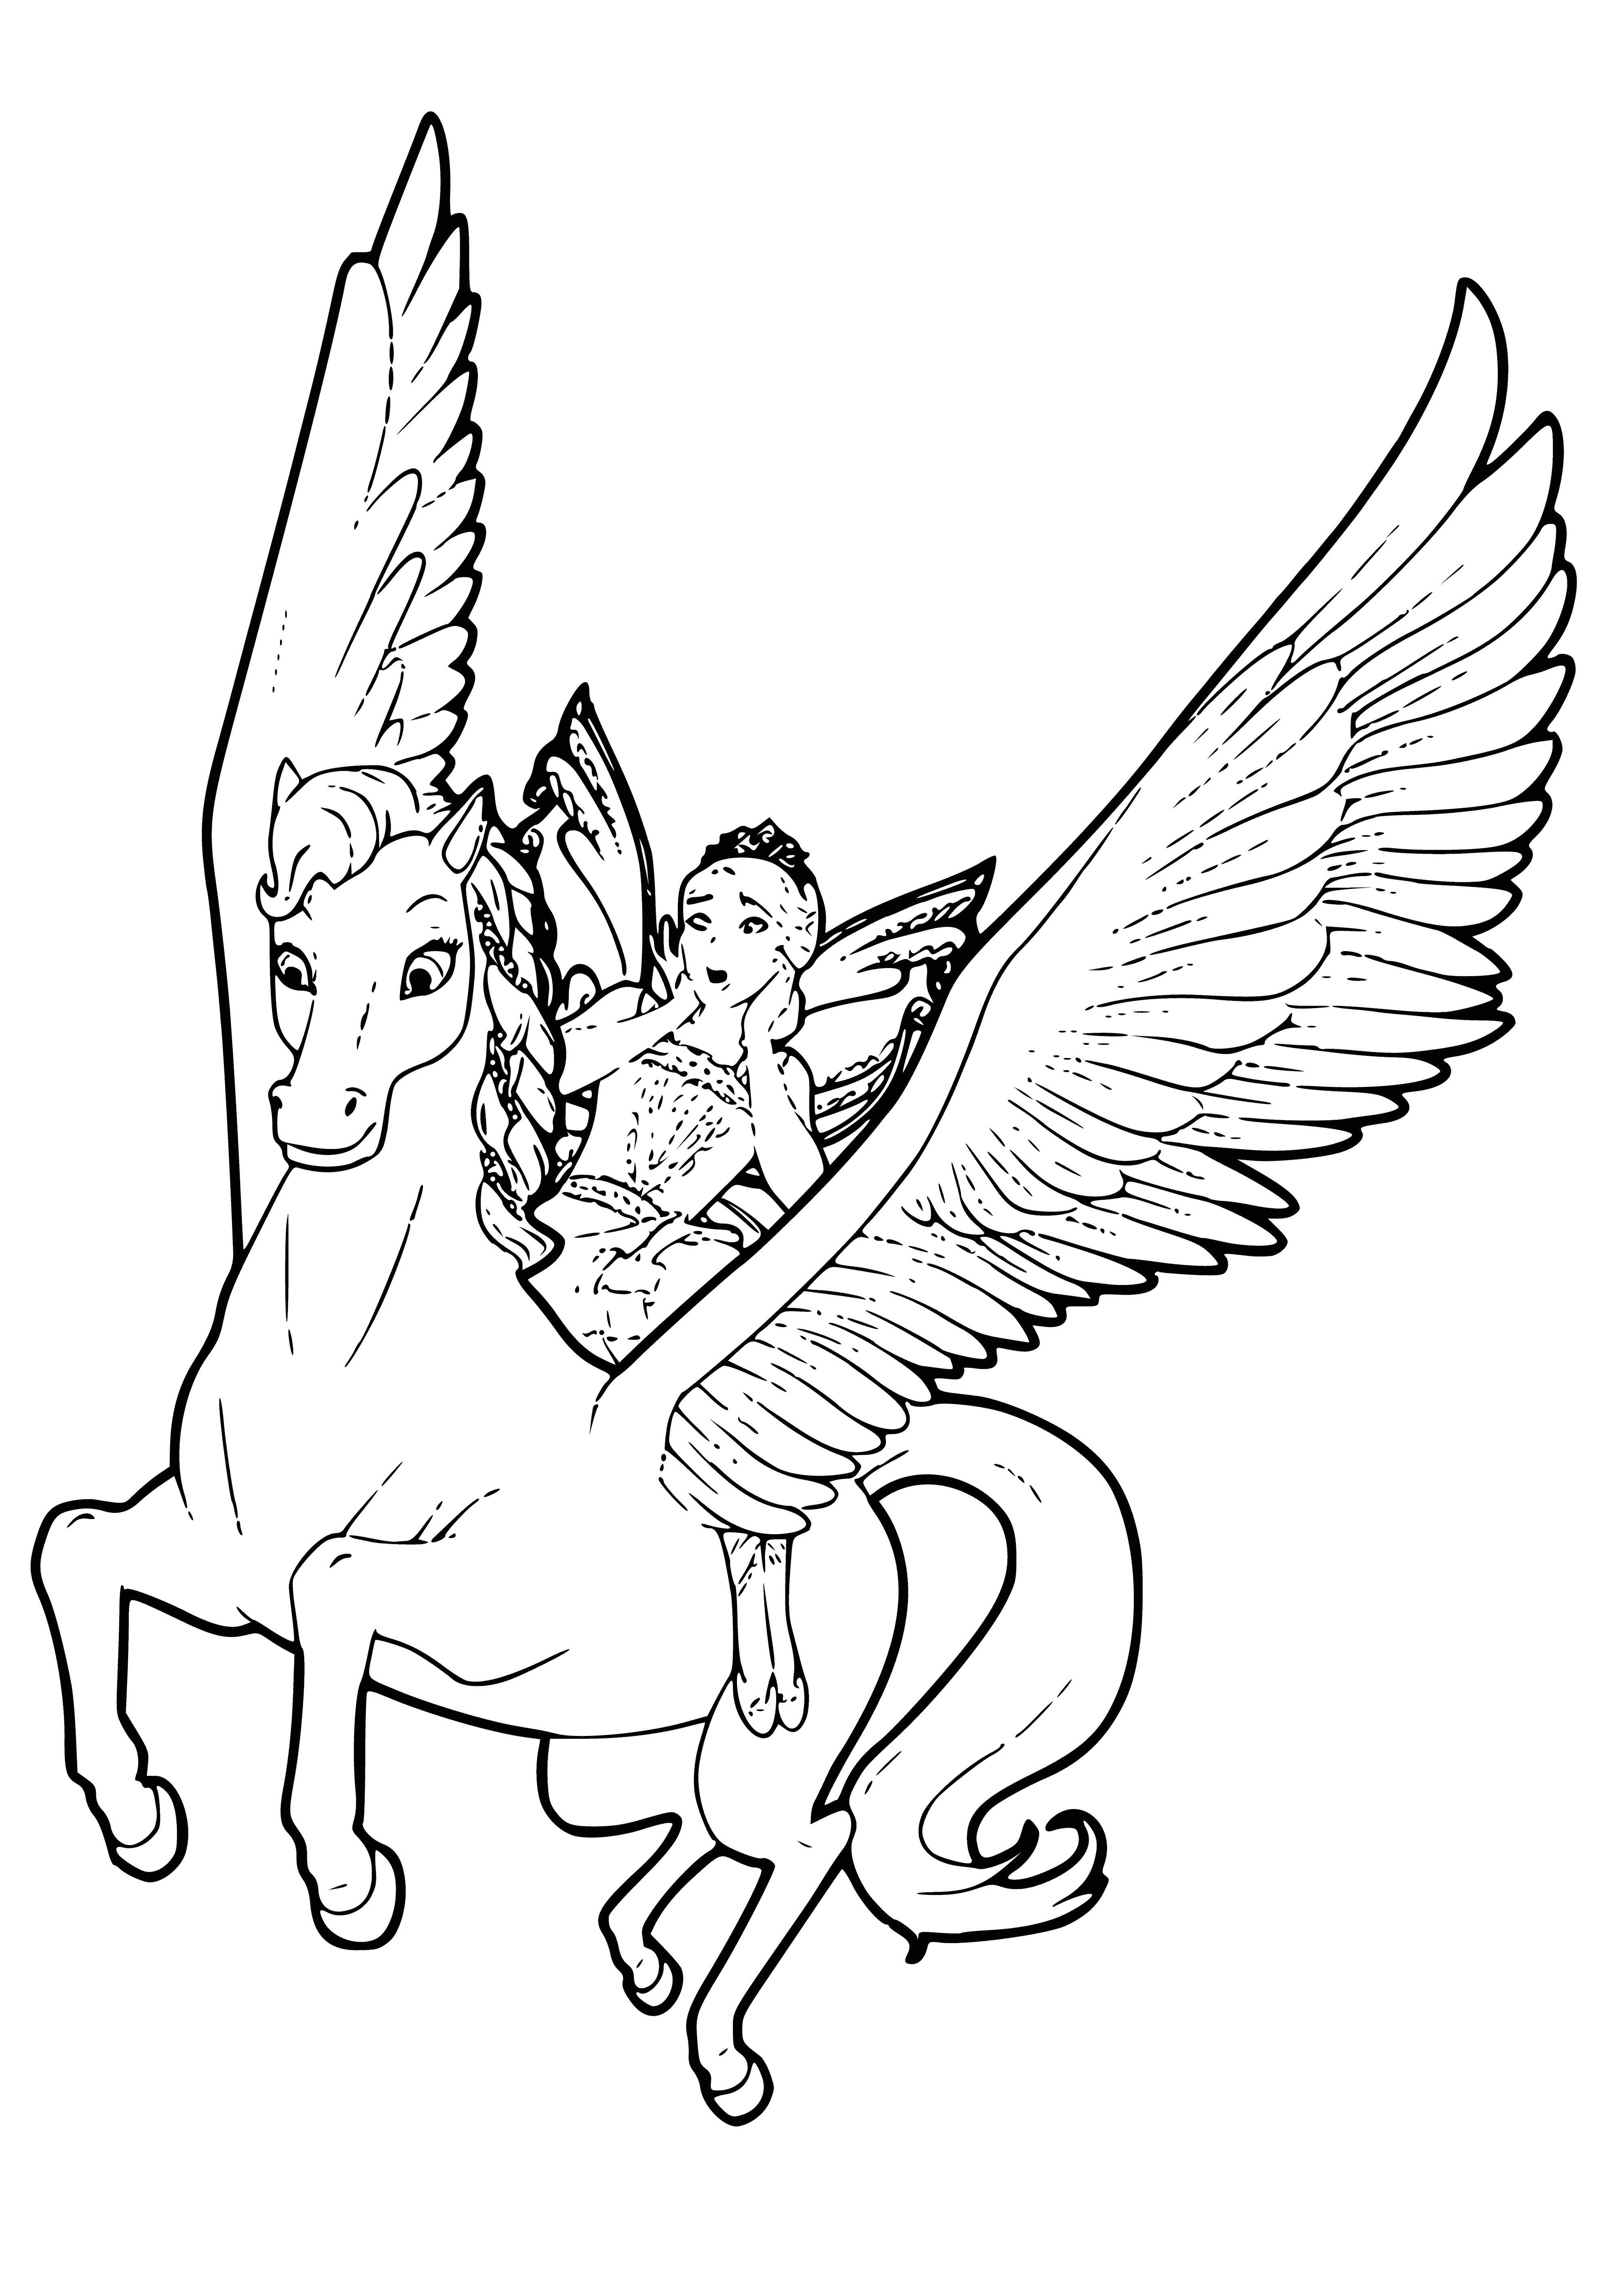 coloring page: Barbie Fairy rides a pink-dressed horse with wand in hand! #DreamBig #BeYou